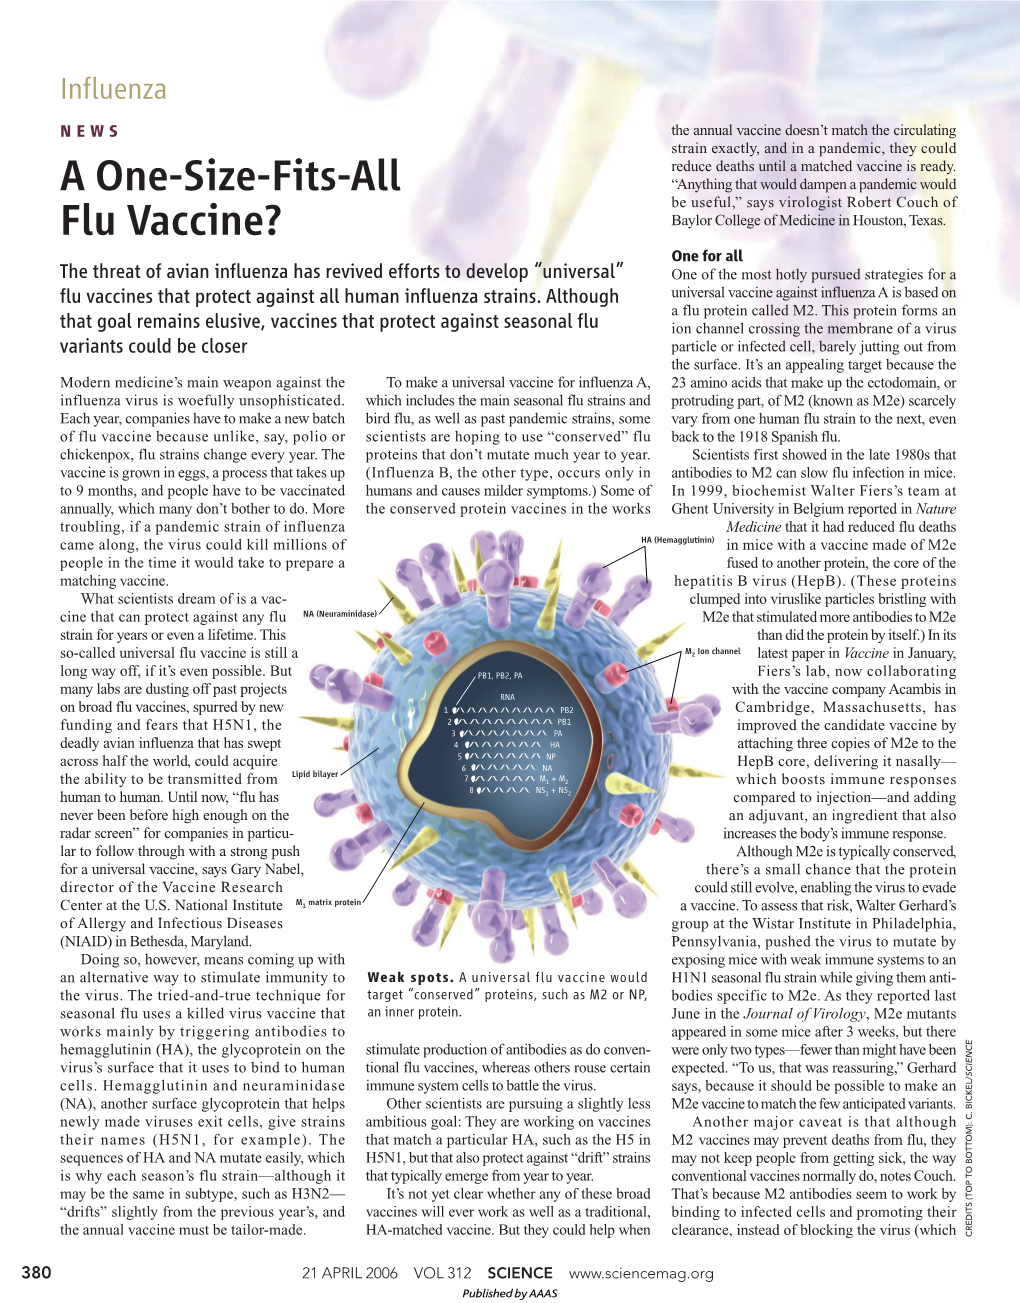 A One-Size-Fits-All Flu Vaccine?